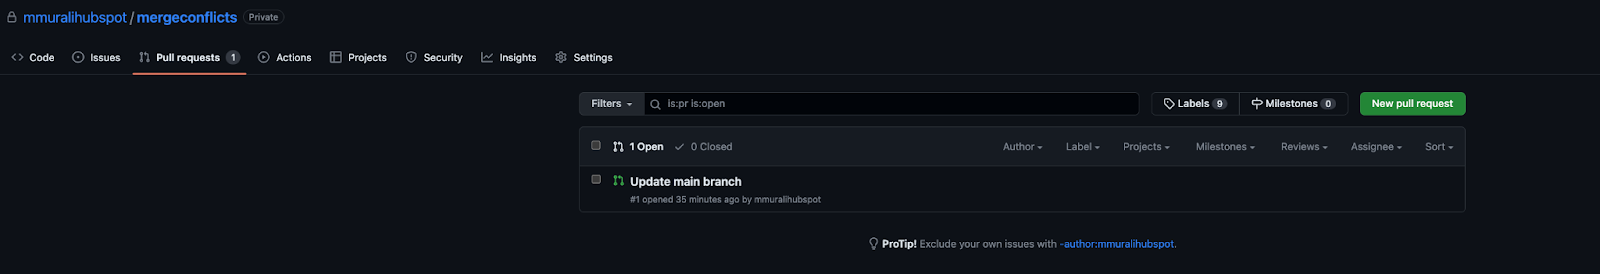 image of github pull requests screen